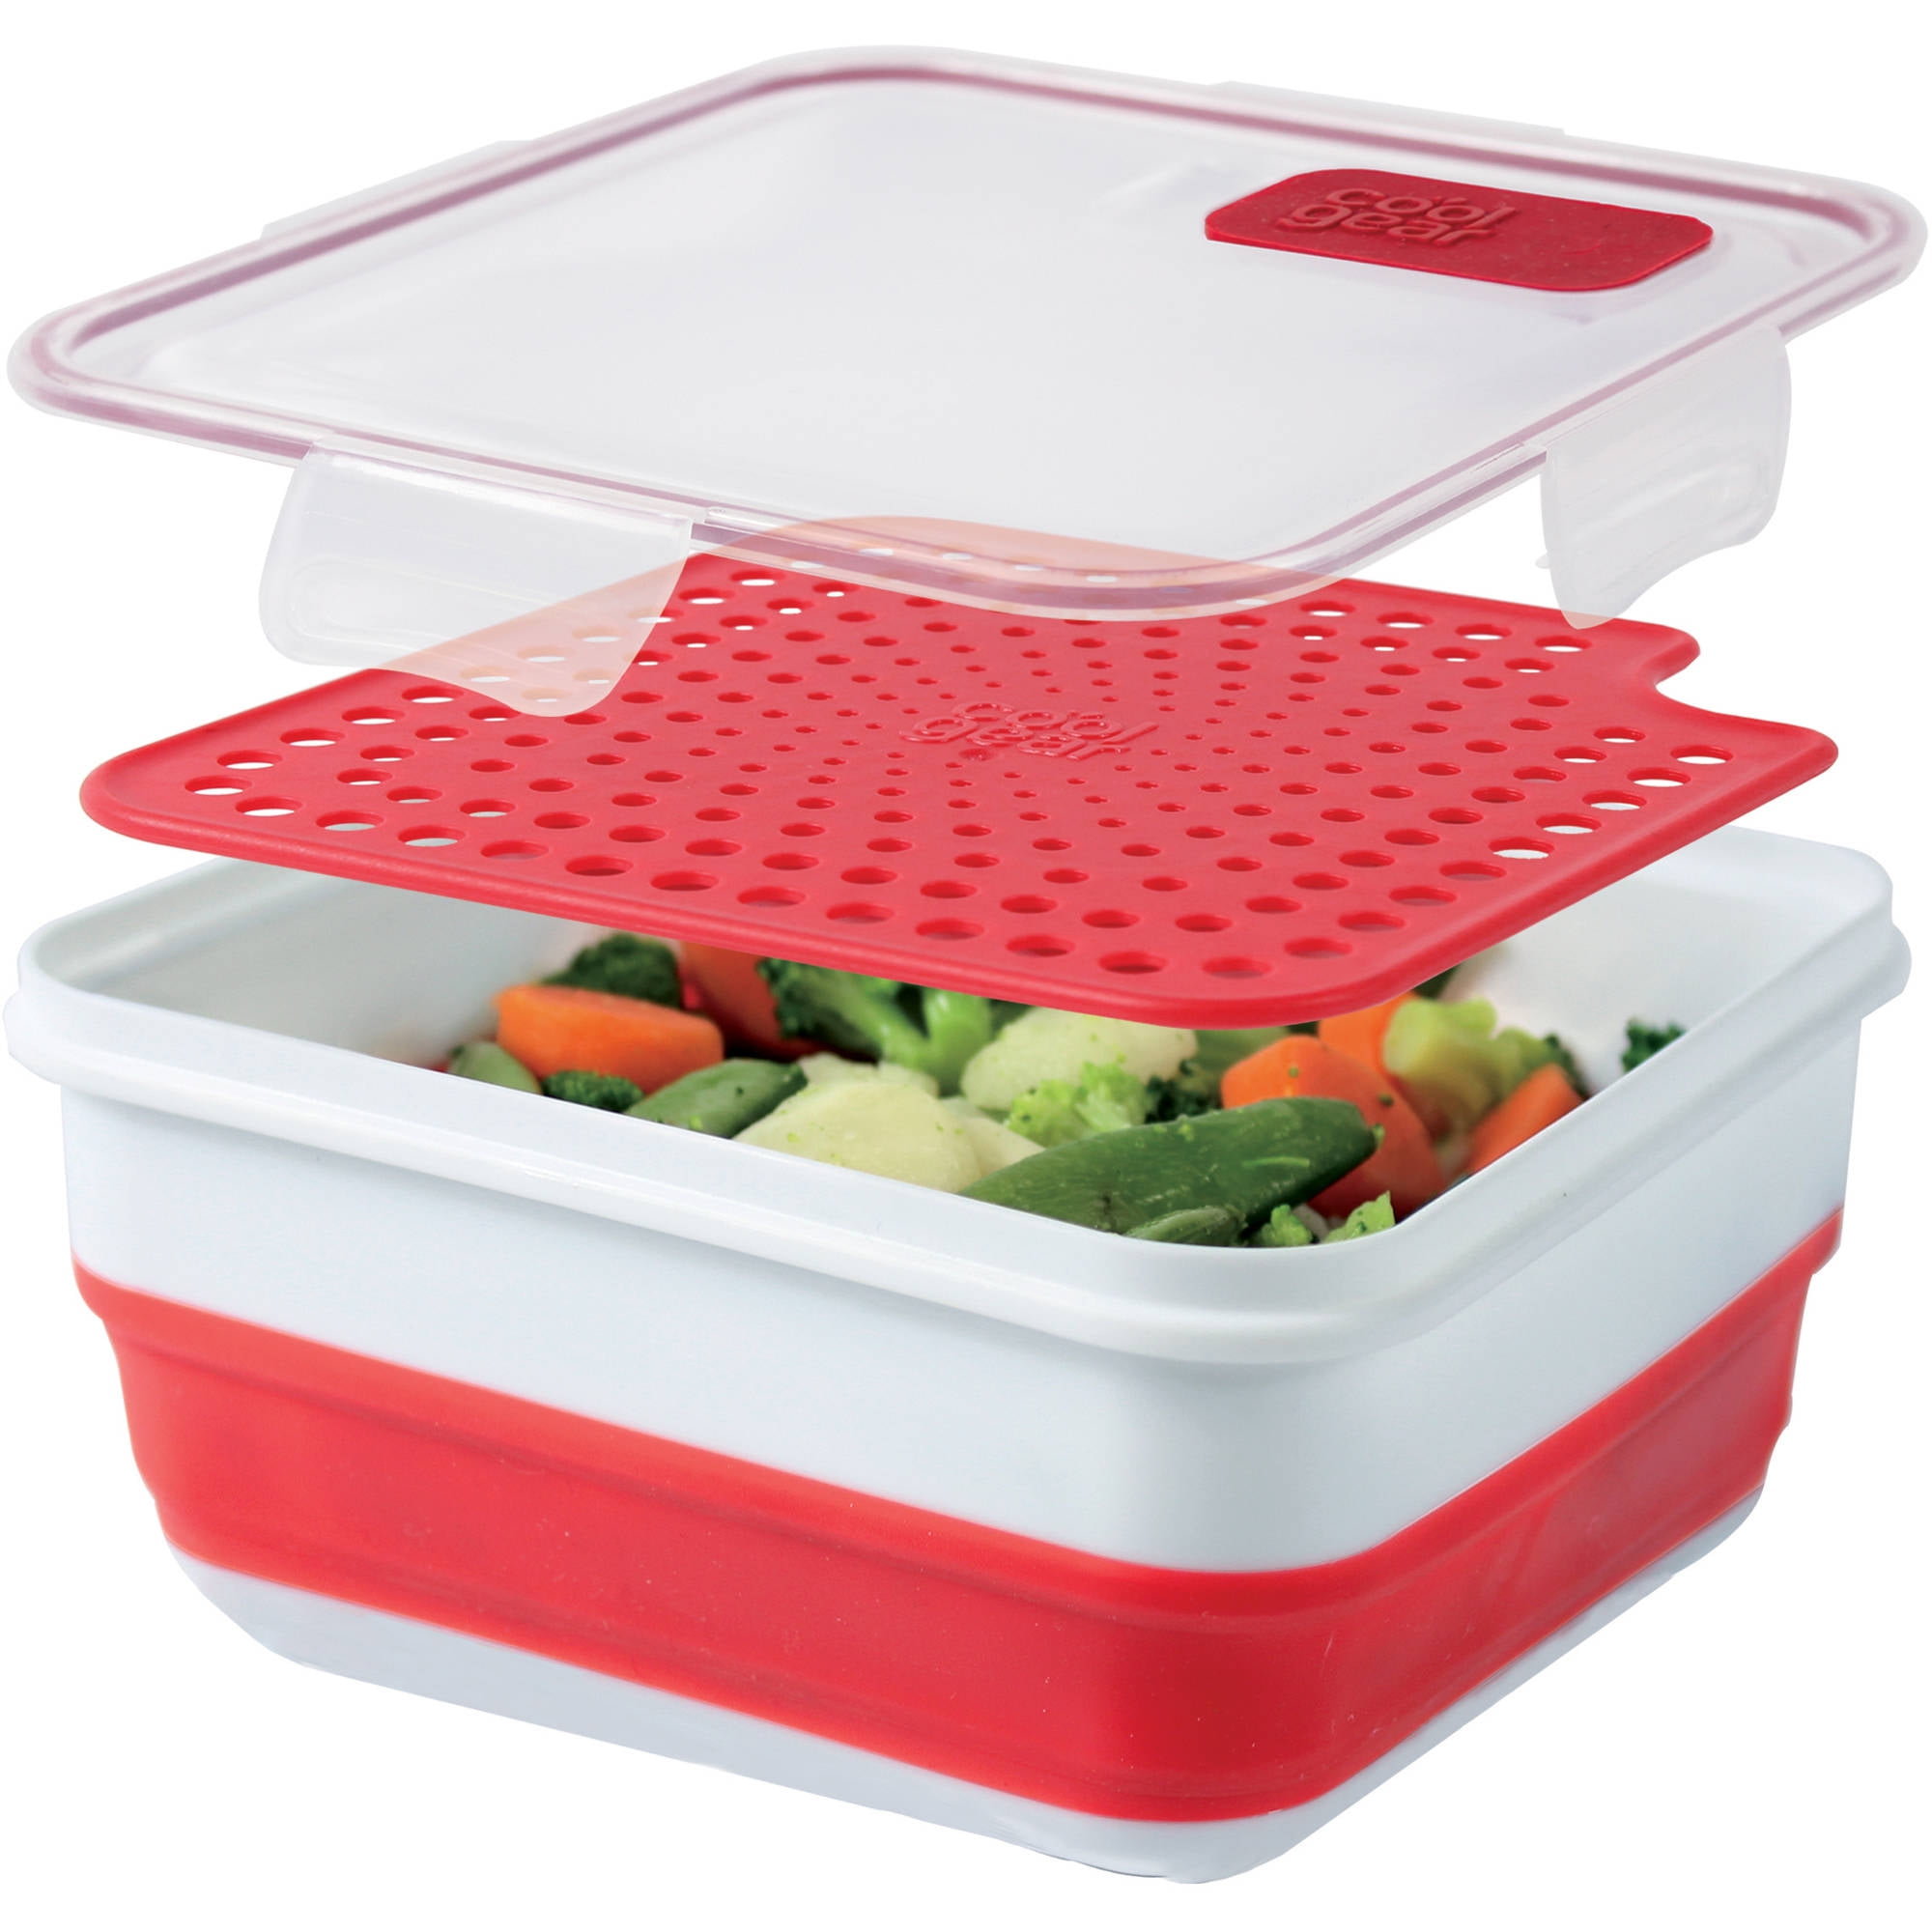 Details about   4 Pcs Baby Kids Food Storage Container Set Leakproof Snack Boxes Containers XN